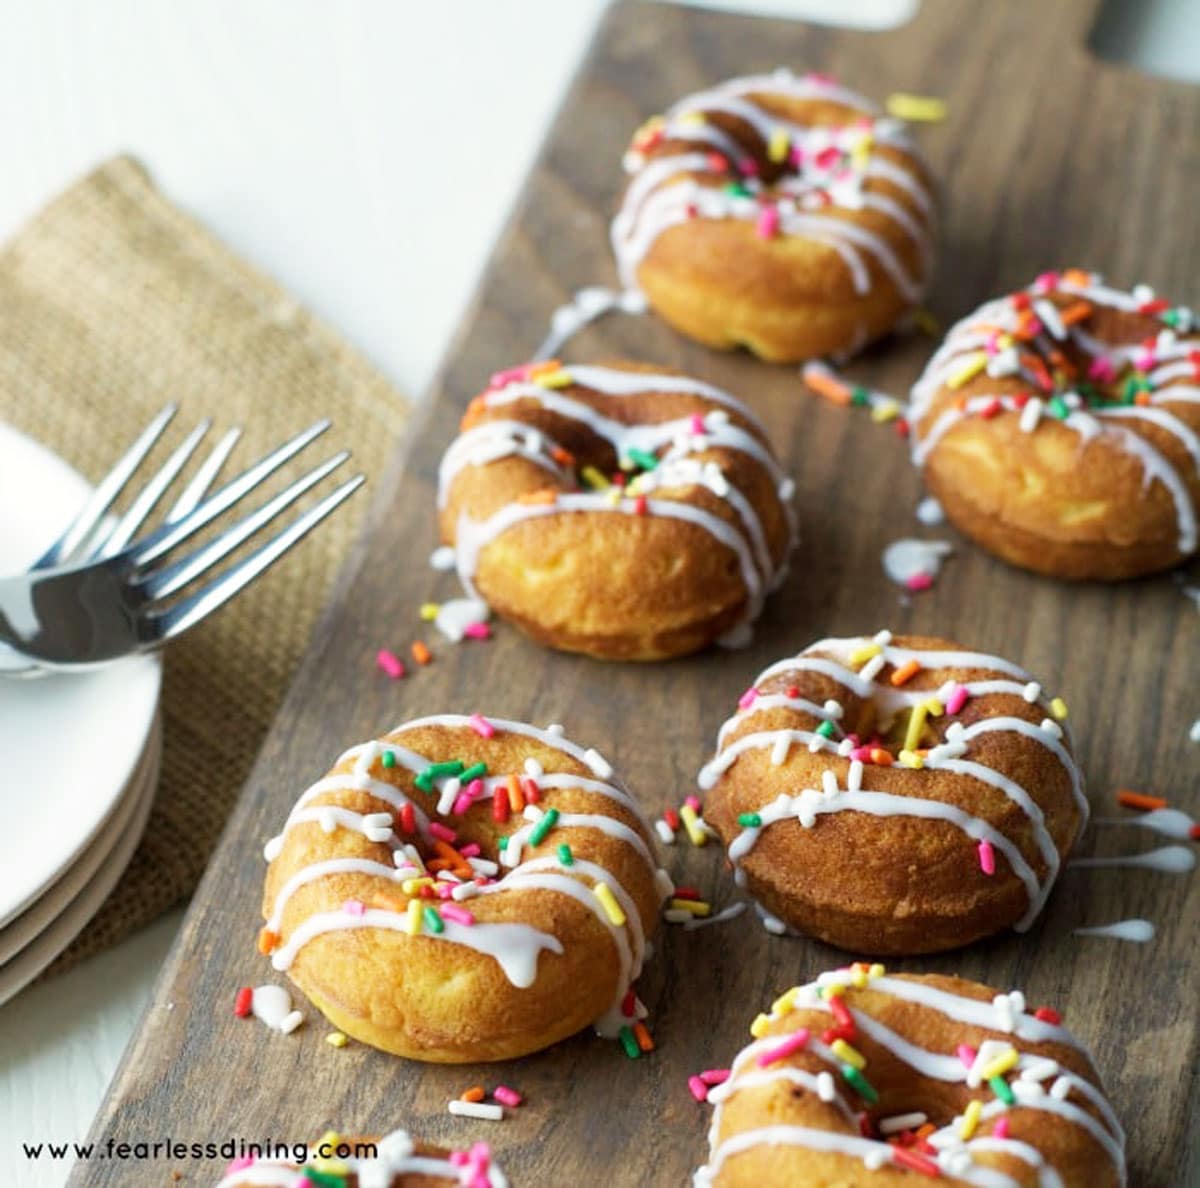 a close up of the decorated vanilla donuts